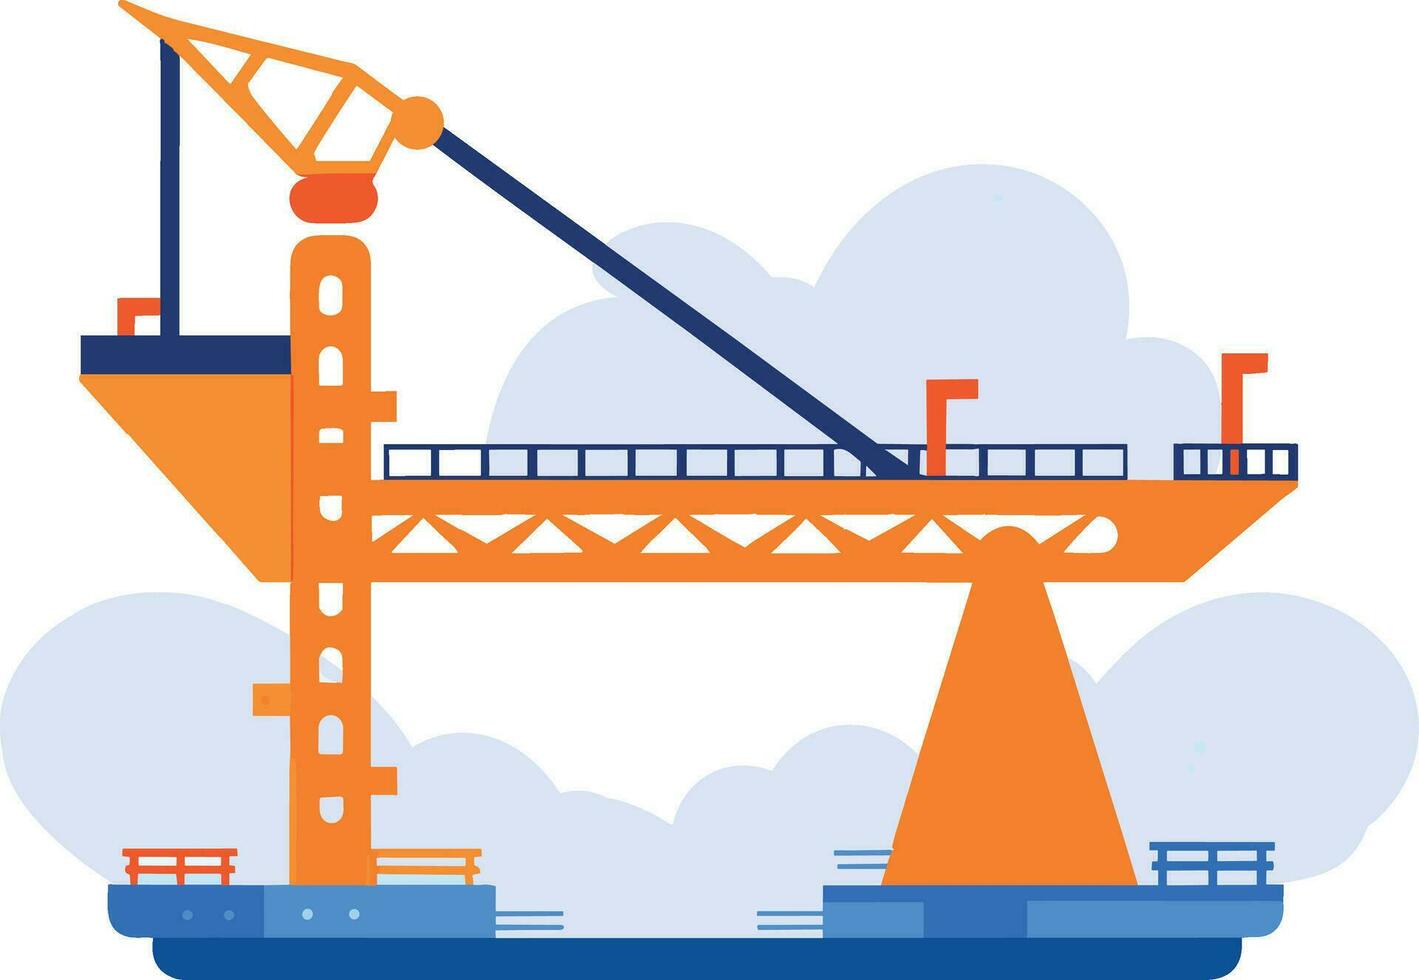 Hand Drawn Bridge with crane under construction in flat style vector